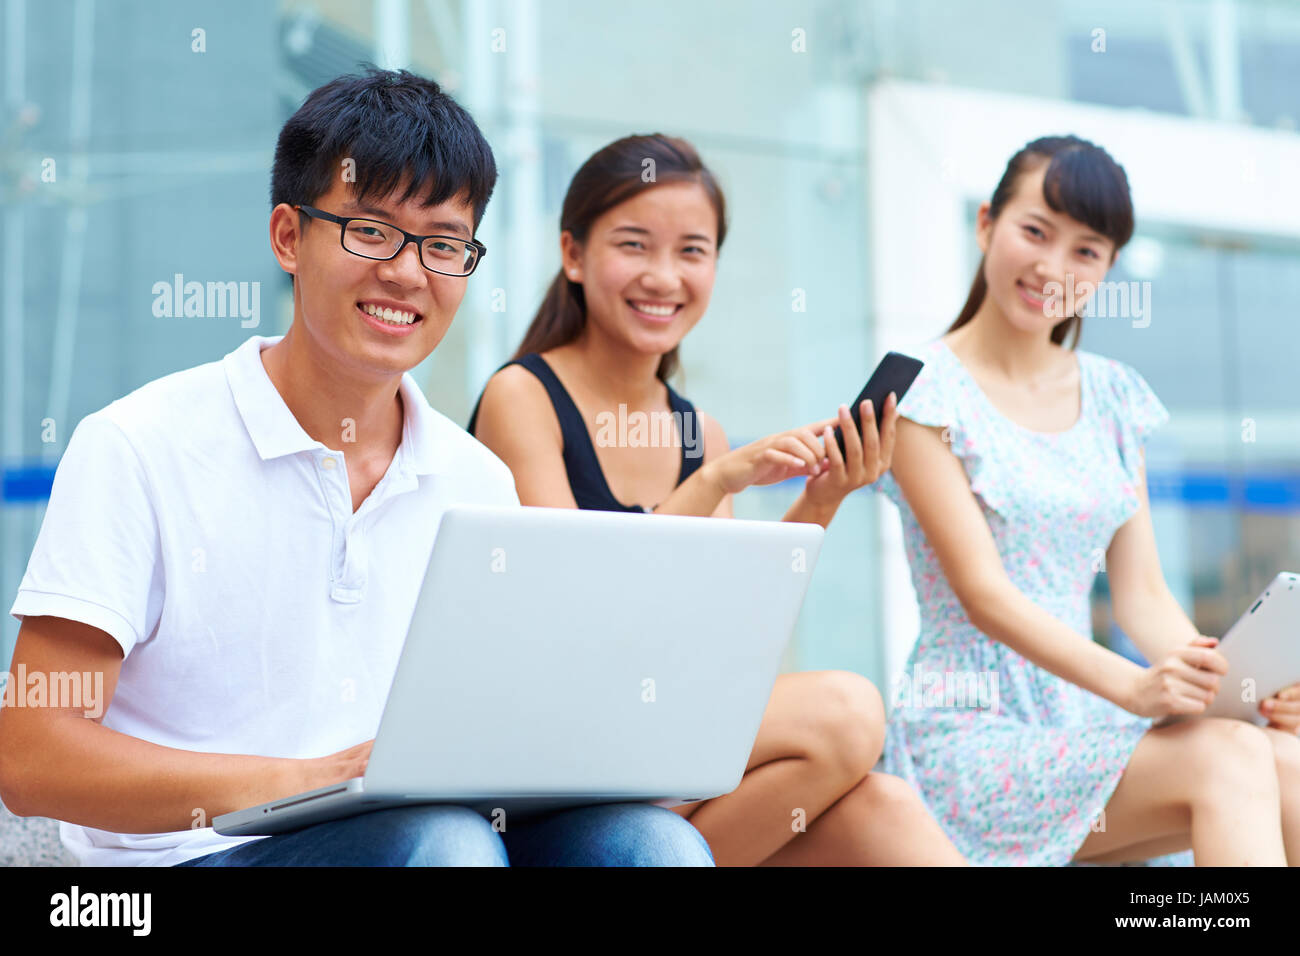 young asian college student using laptop or tablet together outdoor Stock Photo